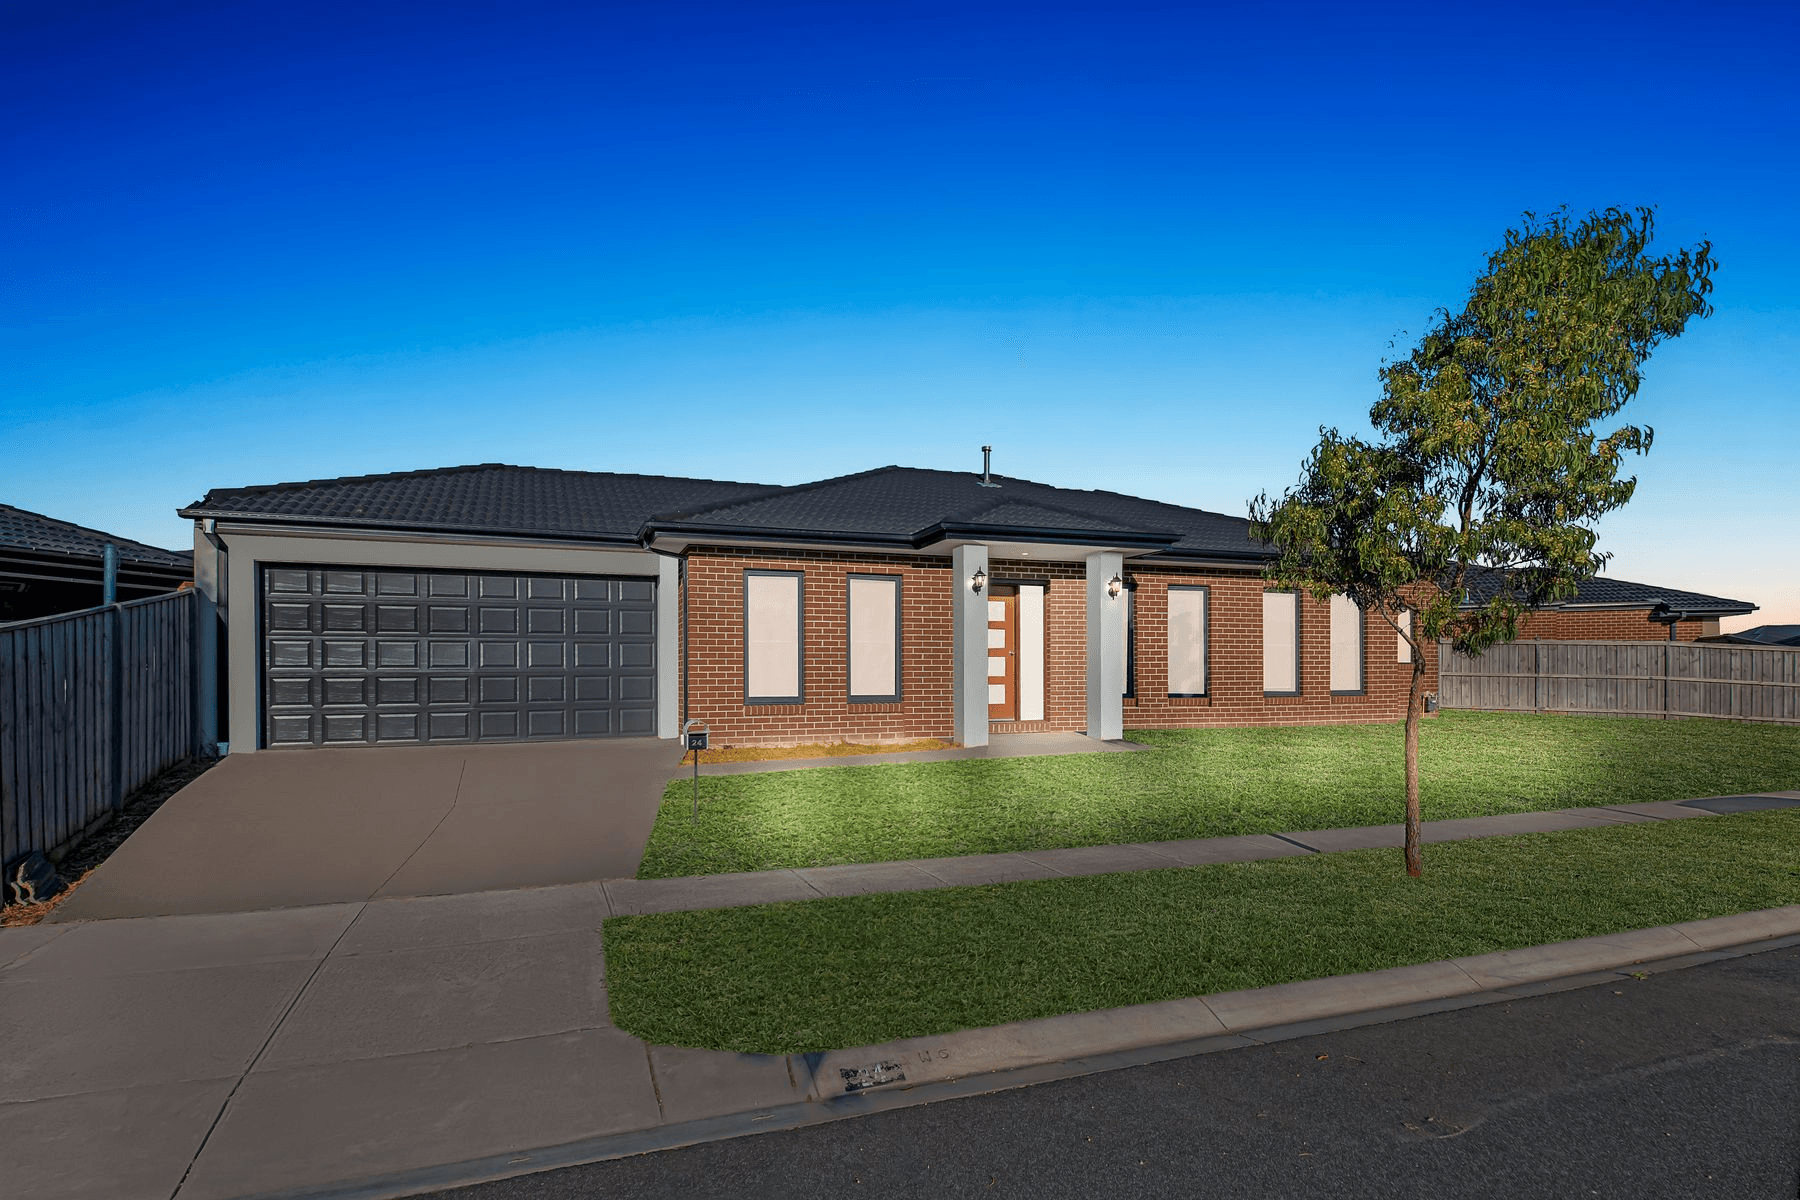 24 Rowling Drive, OFFICER, VIC 3809